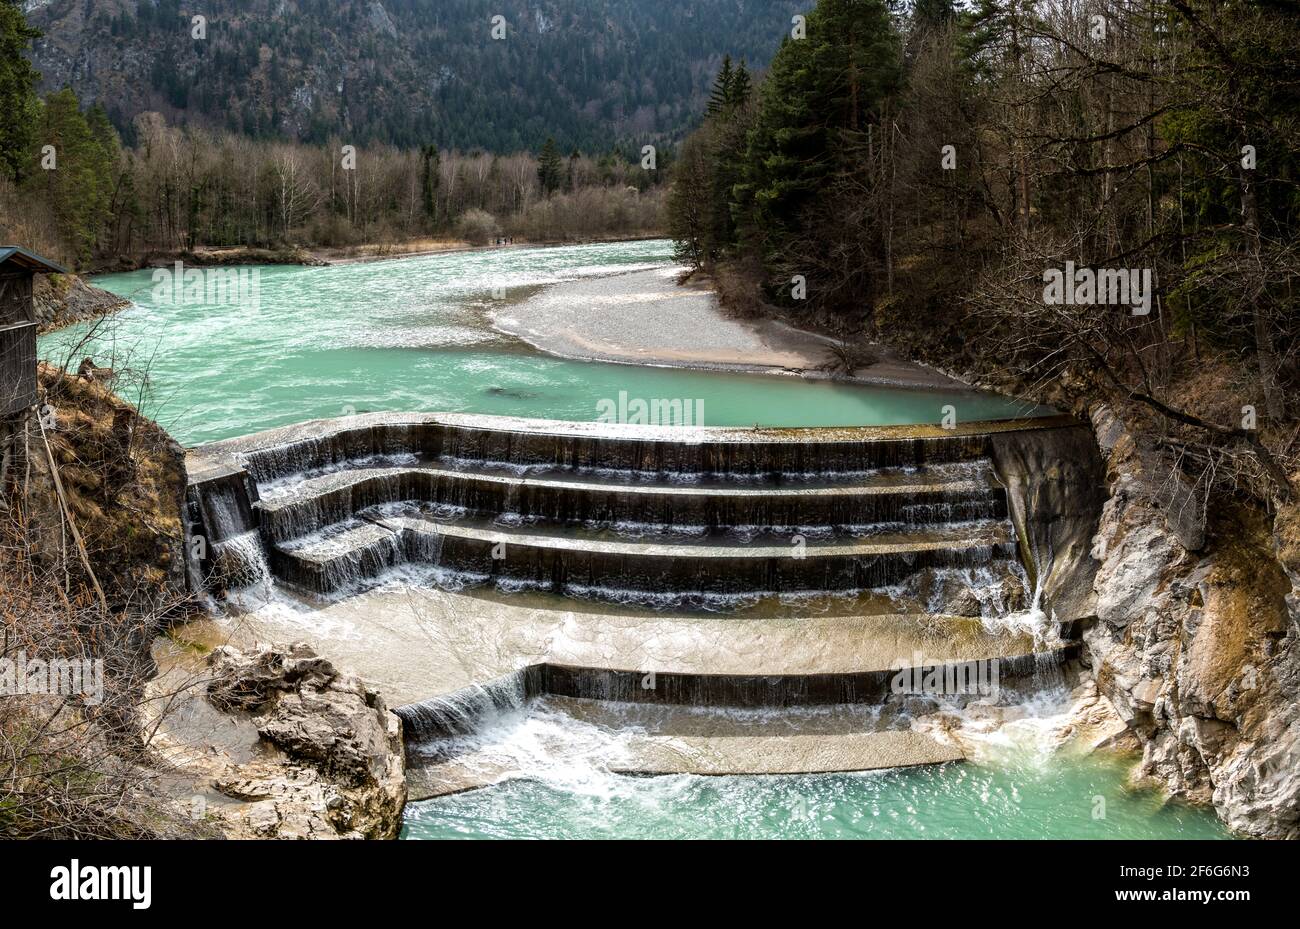 Lechfall in Fussen in Bavaria, Germany Stock Photo